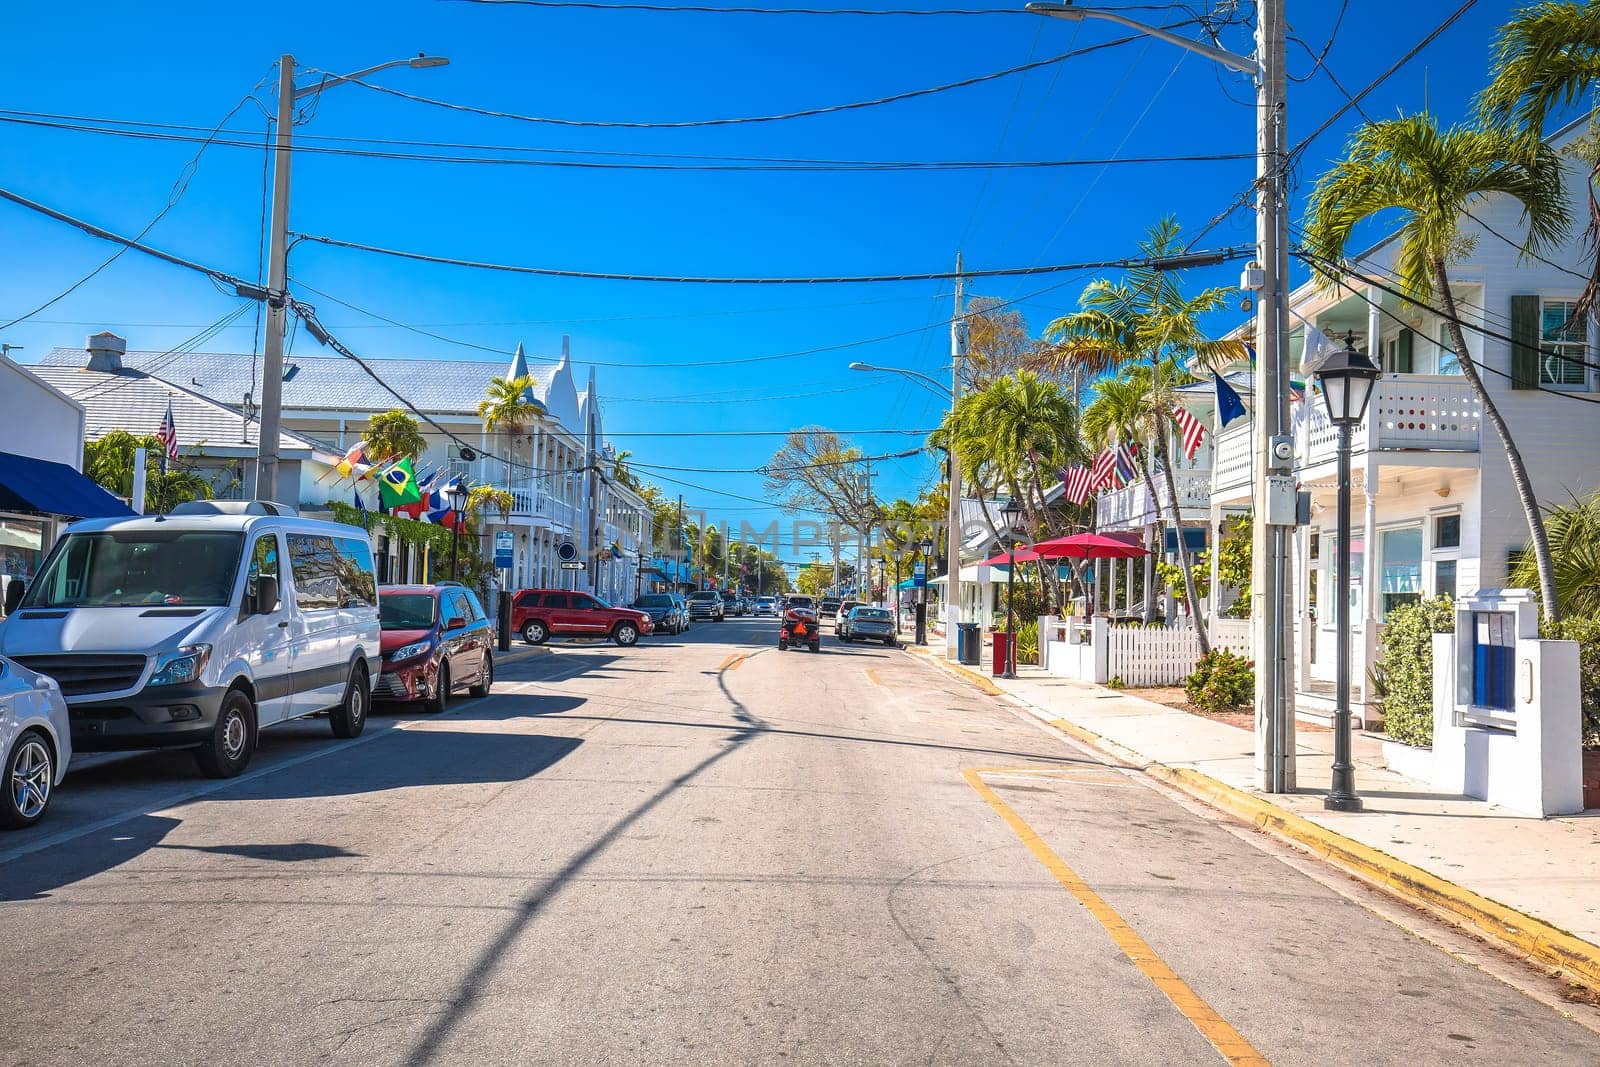 Key West scenic Duval street view, south Florida Keys, United states of America